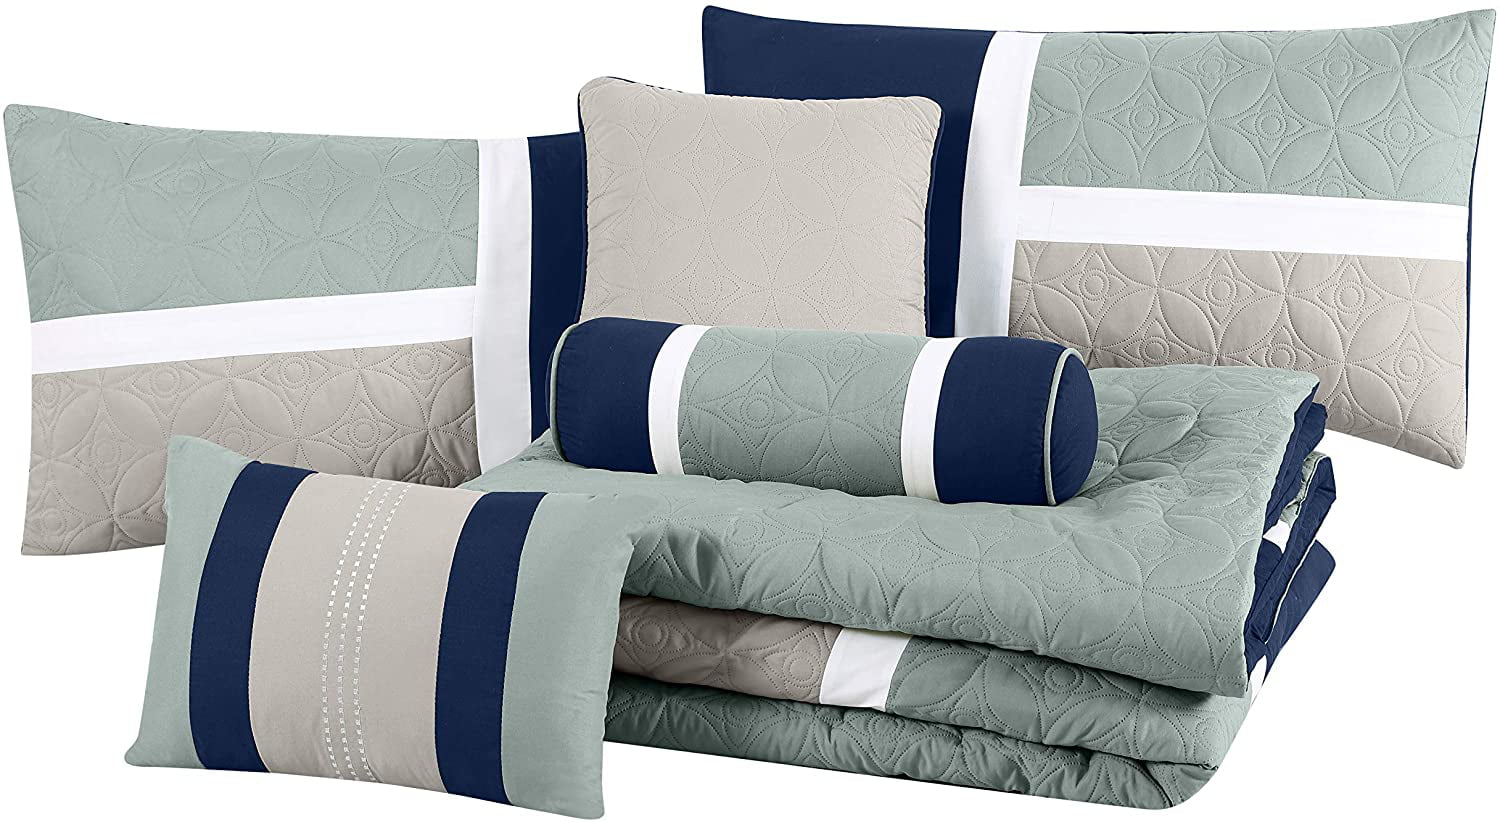 Chezmoi Collection Upland 7-Piece Quilted Patchwork Comforter Set King Gray/Light Blue/Charcoal 